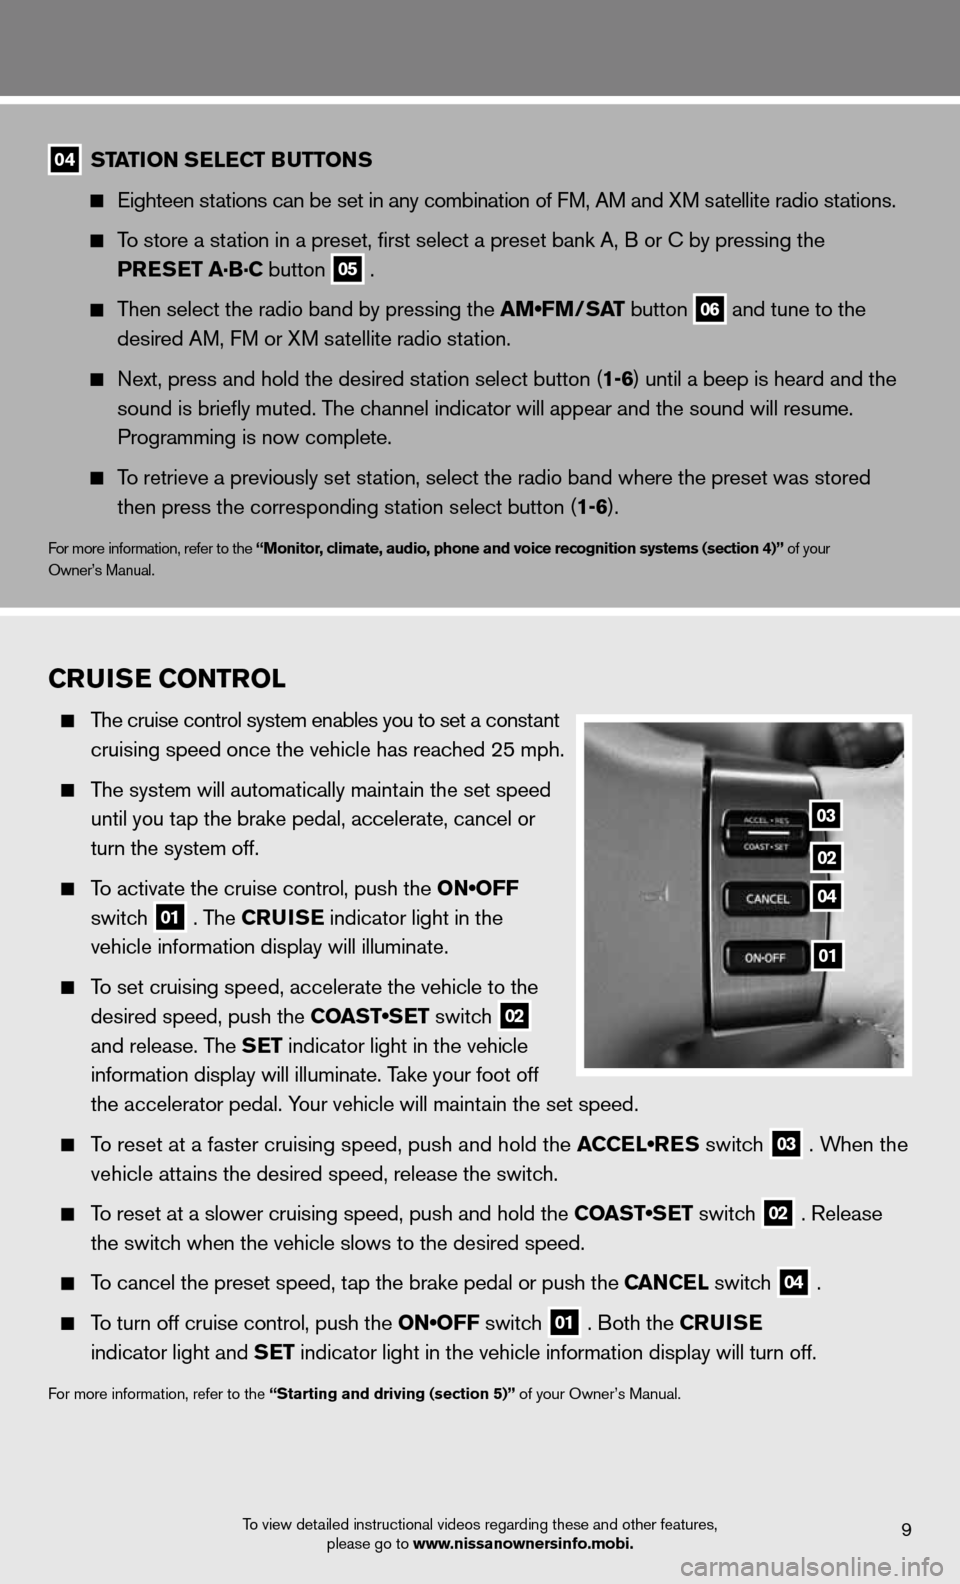 NISSAN ARMADA 2012 1.G Quick Reference Guide 9To view detailed instructional videos regarding these and other features, please go to www.nissanownersinfo.mobi.
04 station s
ElEC t Buttons  
  
  eighteen stations can be set in any combination of